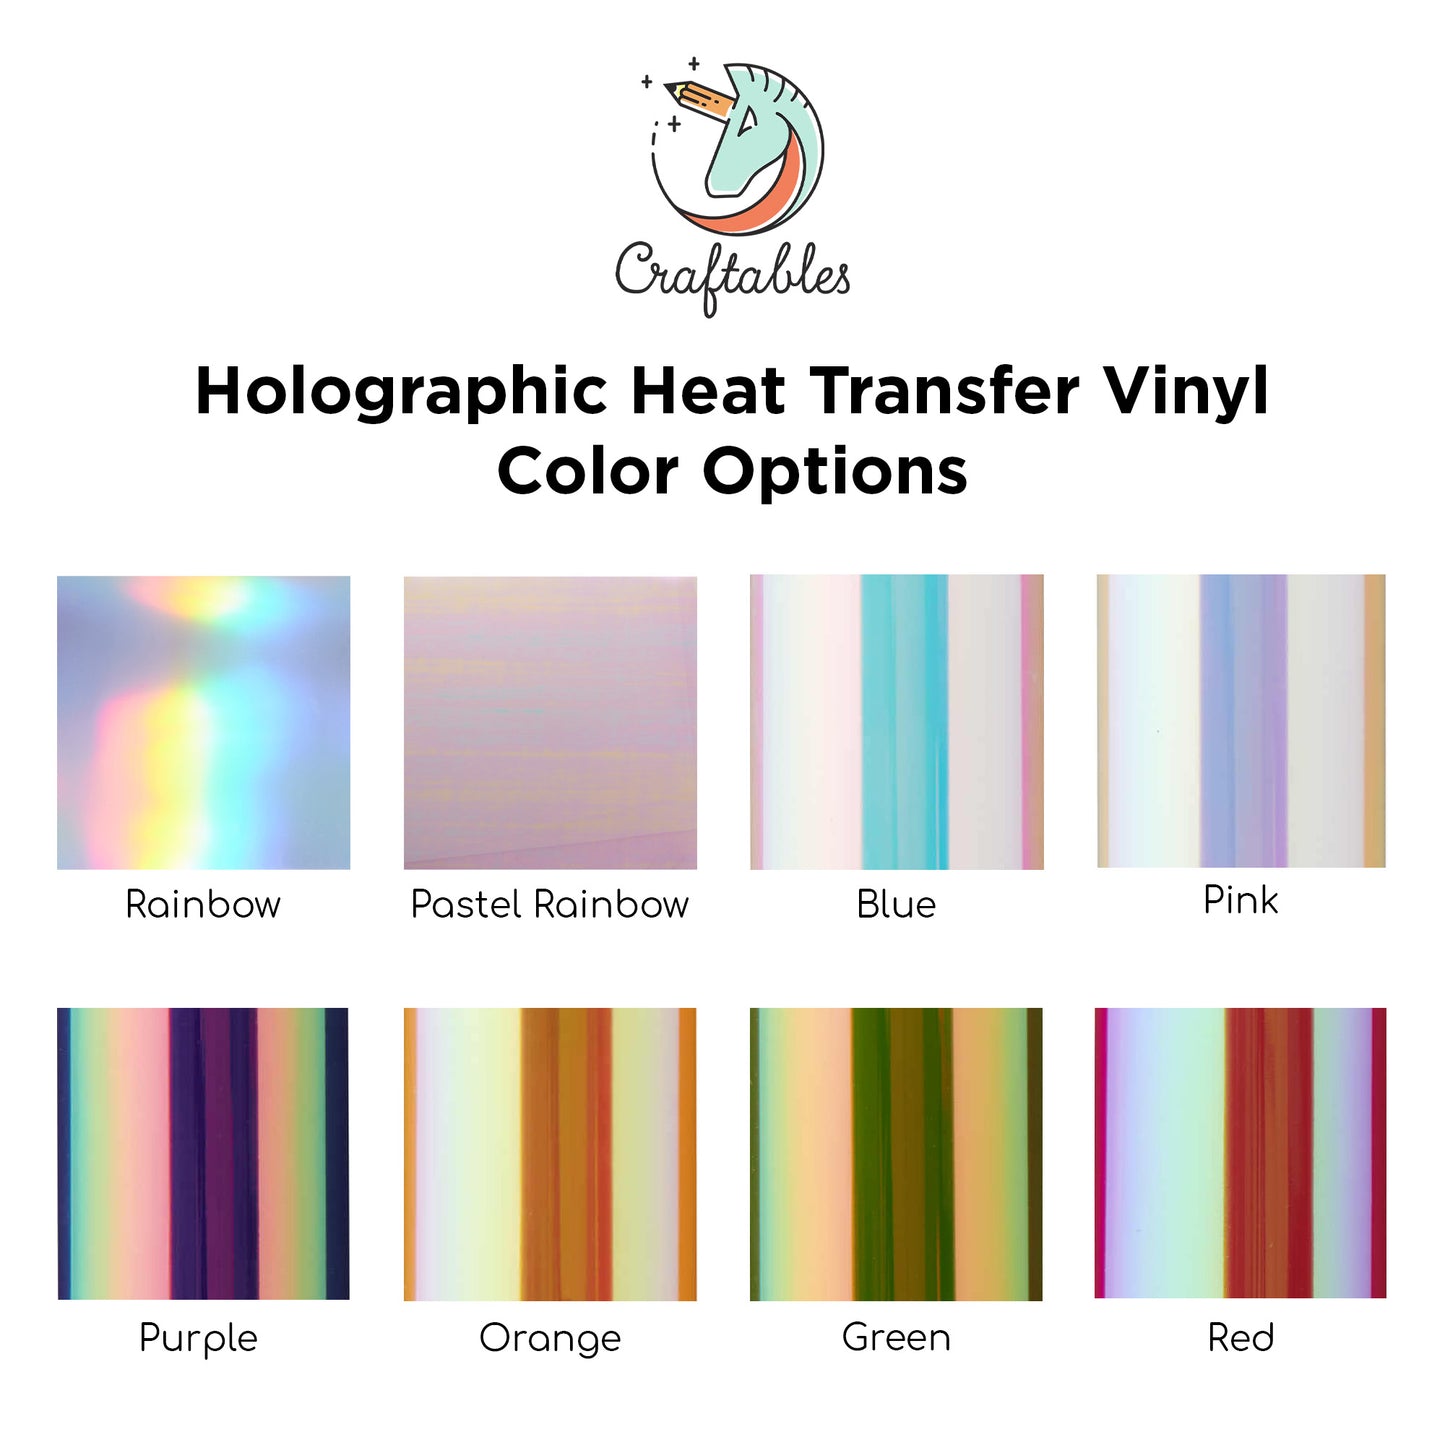 Red Holographic Heat Transfer Vinyl Sheets By Craftables